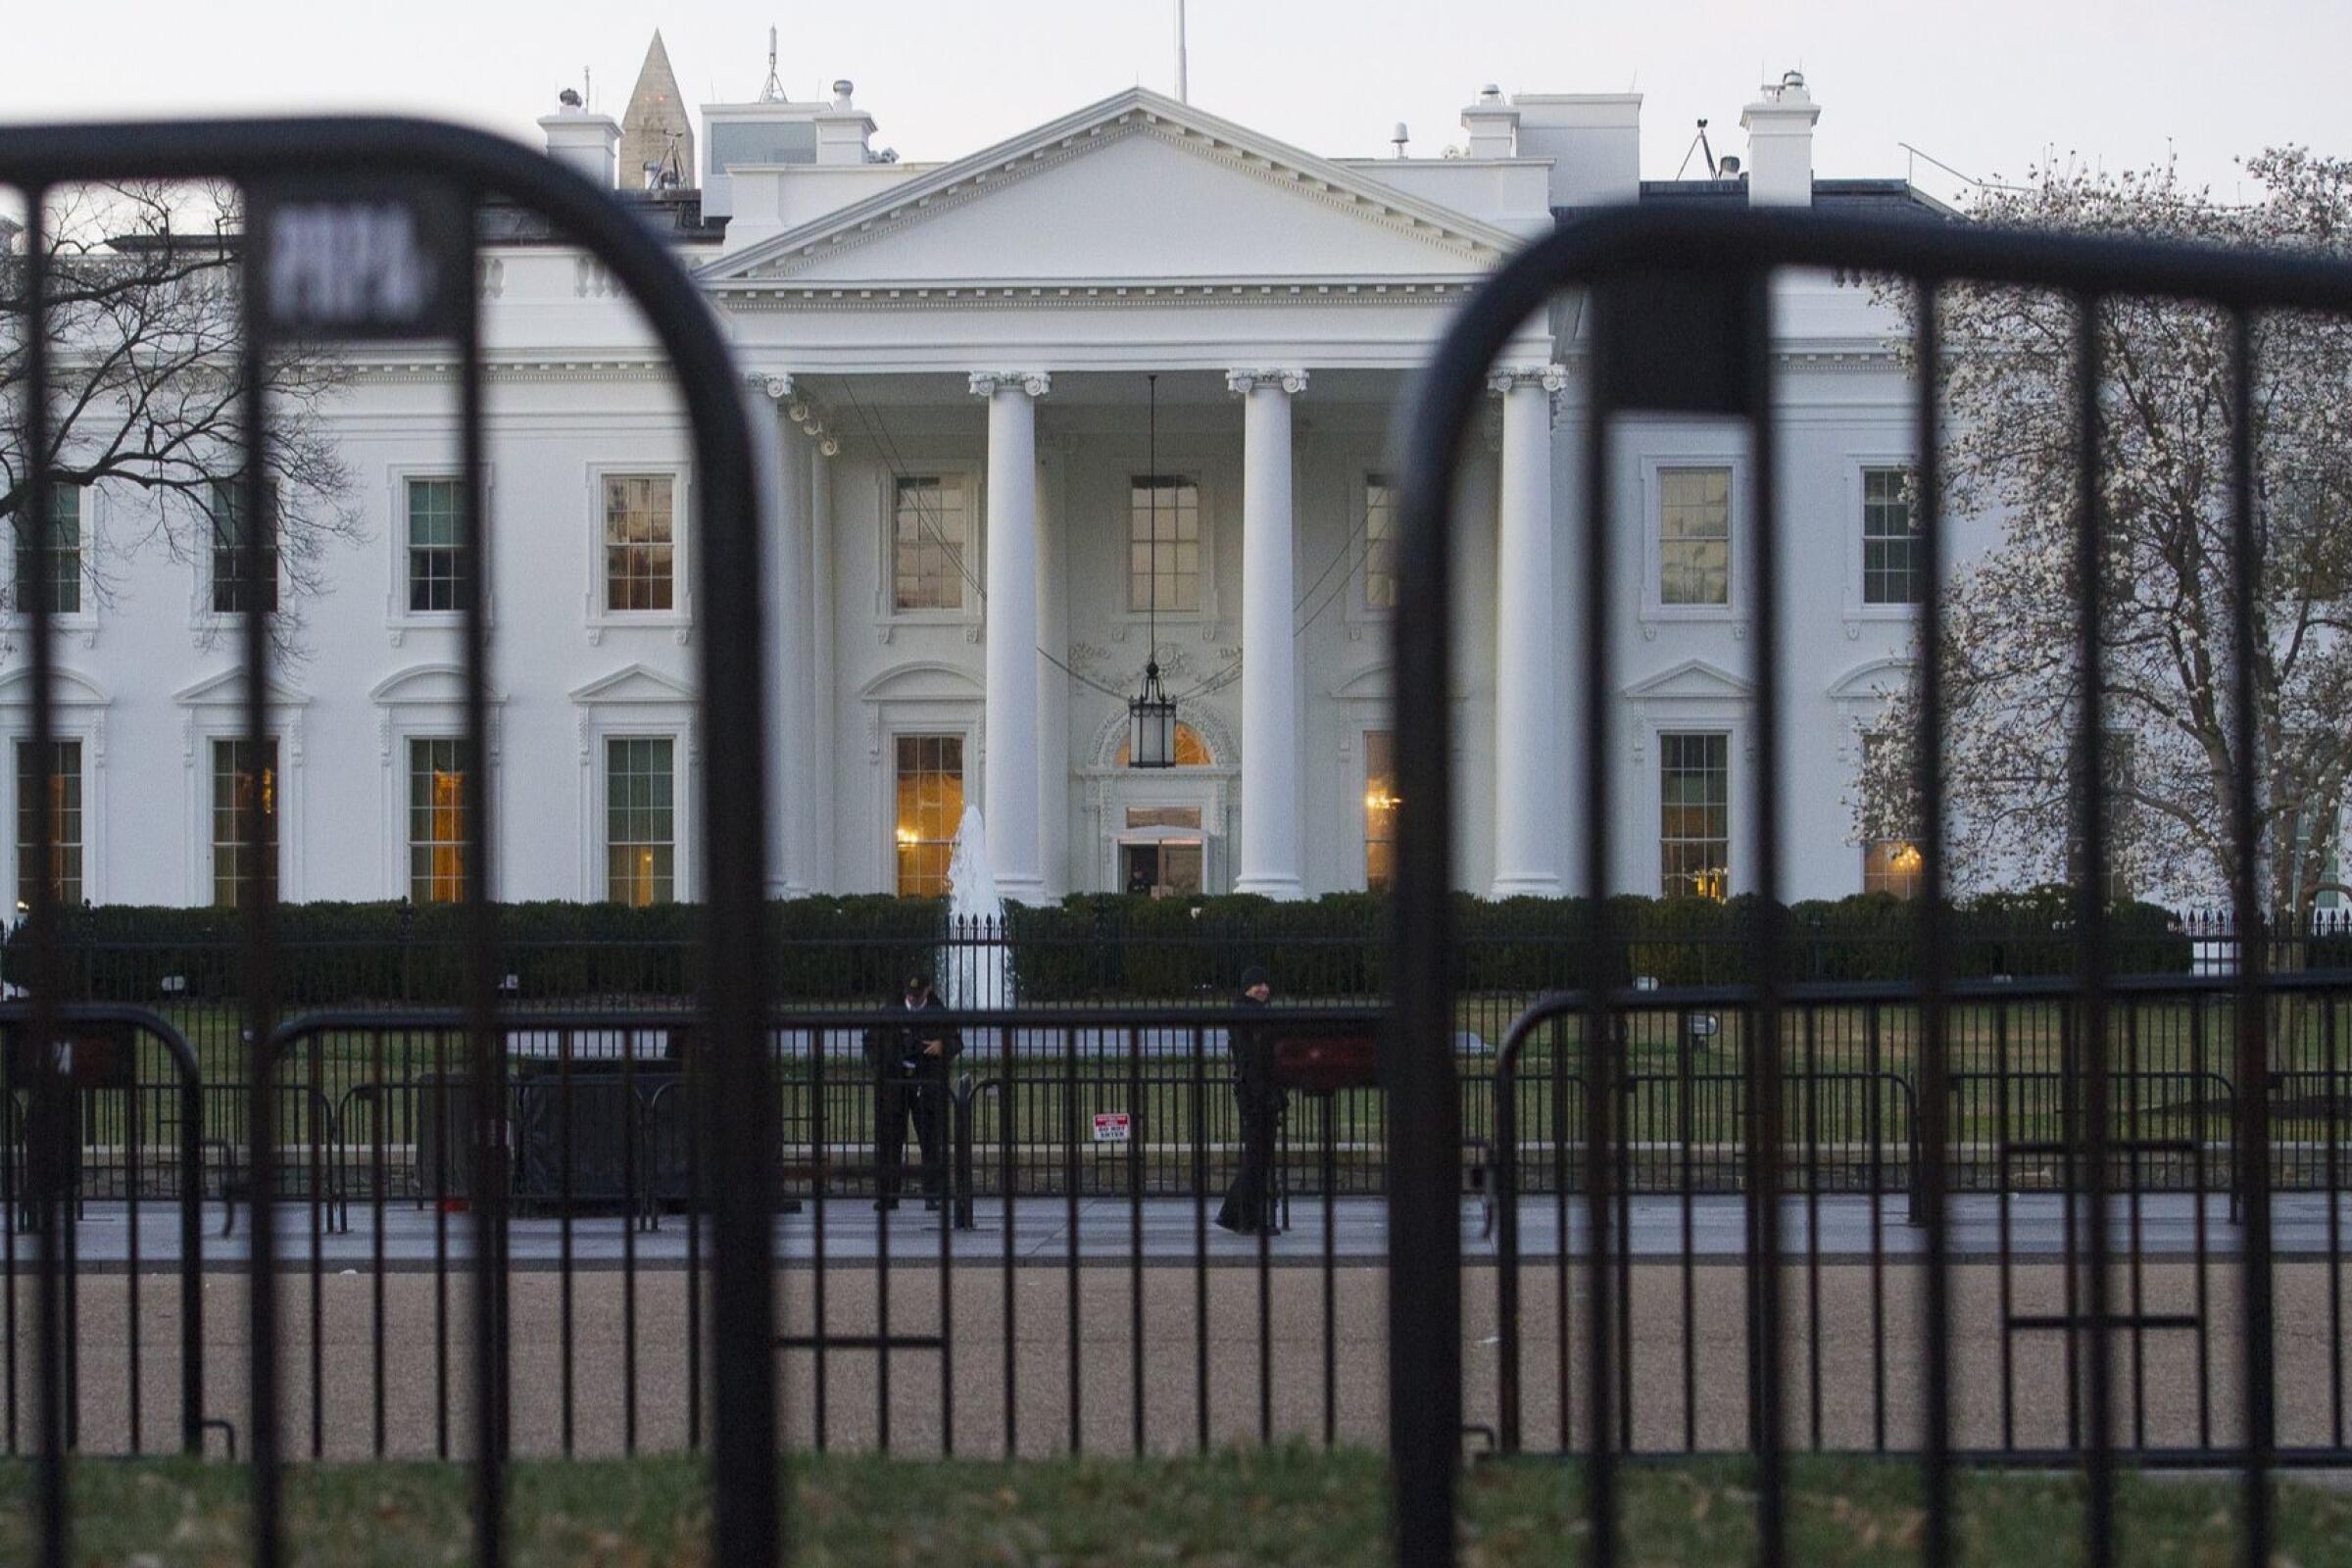 The White House behind security barriers.